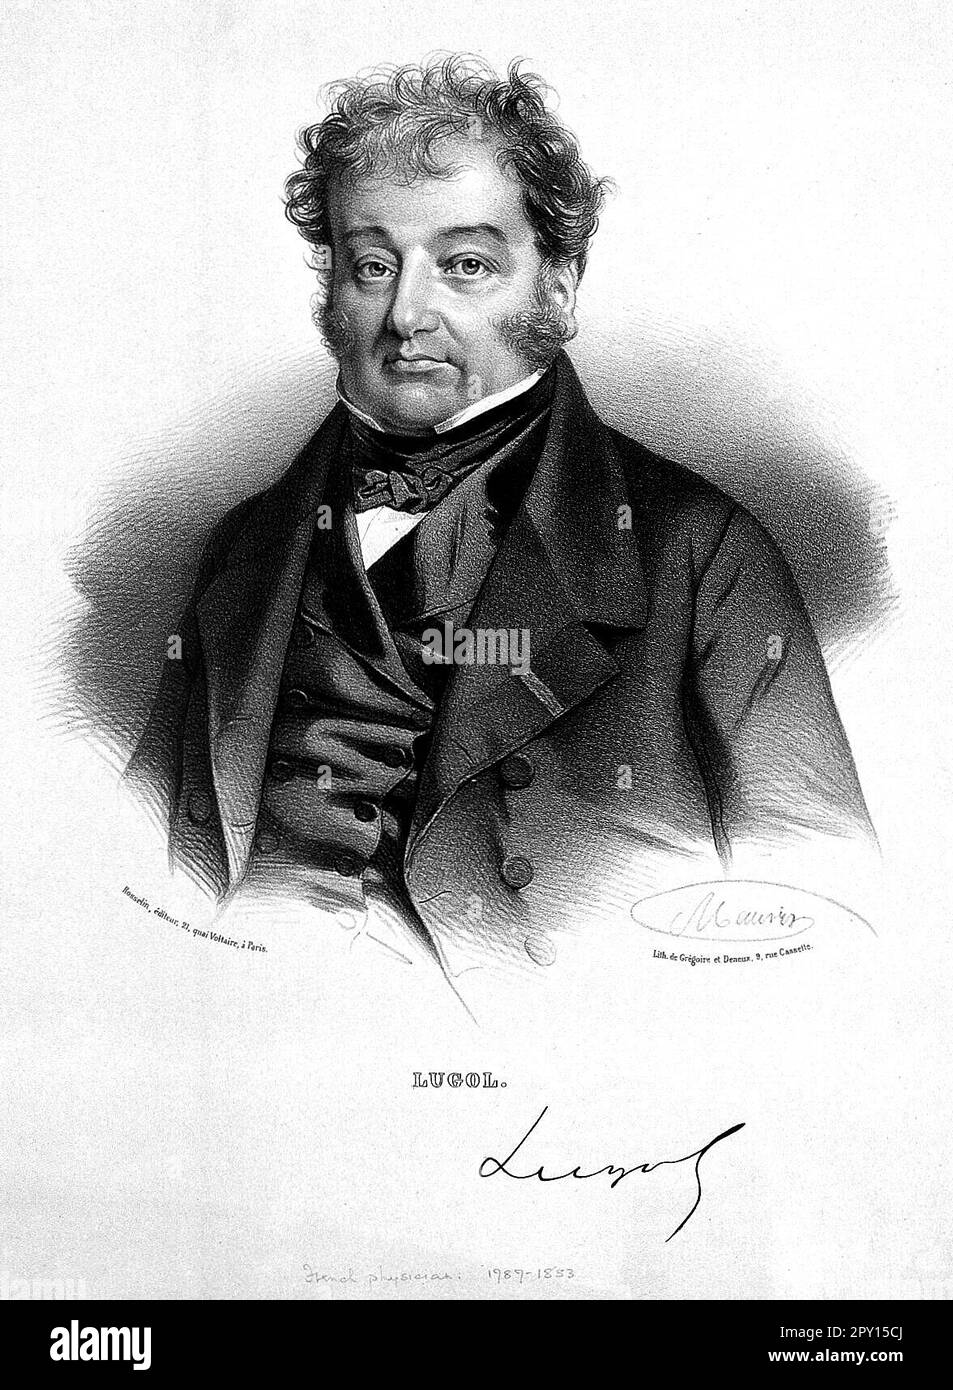 Jean Guillaume Auguste Lugol, 1786 – 1851, was a French physician, vintage lithograph by Nicolas Eustache Maurin 1800s Stock Photo